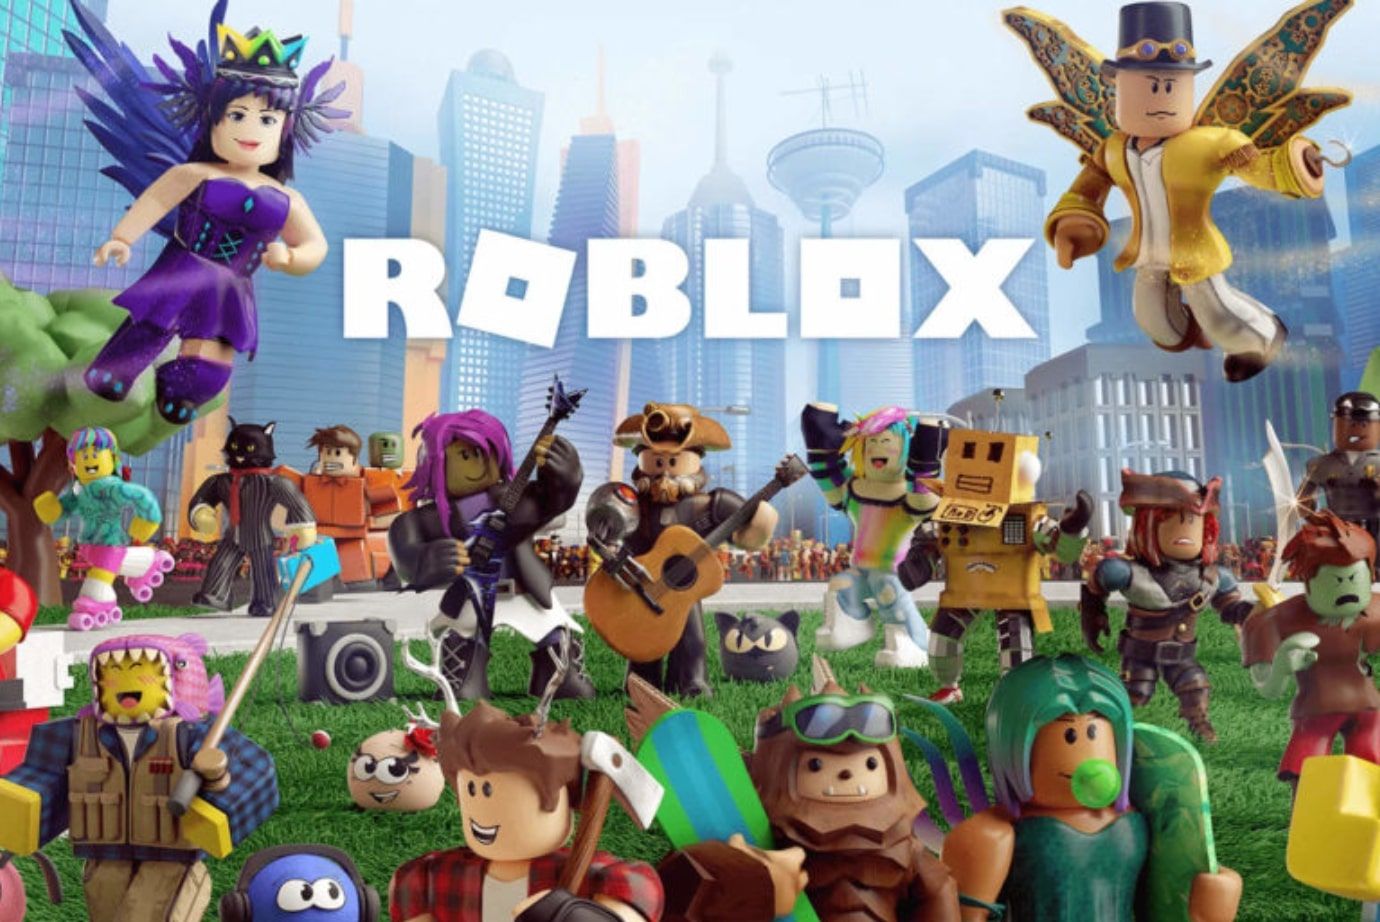 Roblox September 2020 Promo Codes New Cosmetics All Active Codes Backpacks Crystalline Companion More - fully loaded backpack roblox promo code